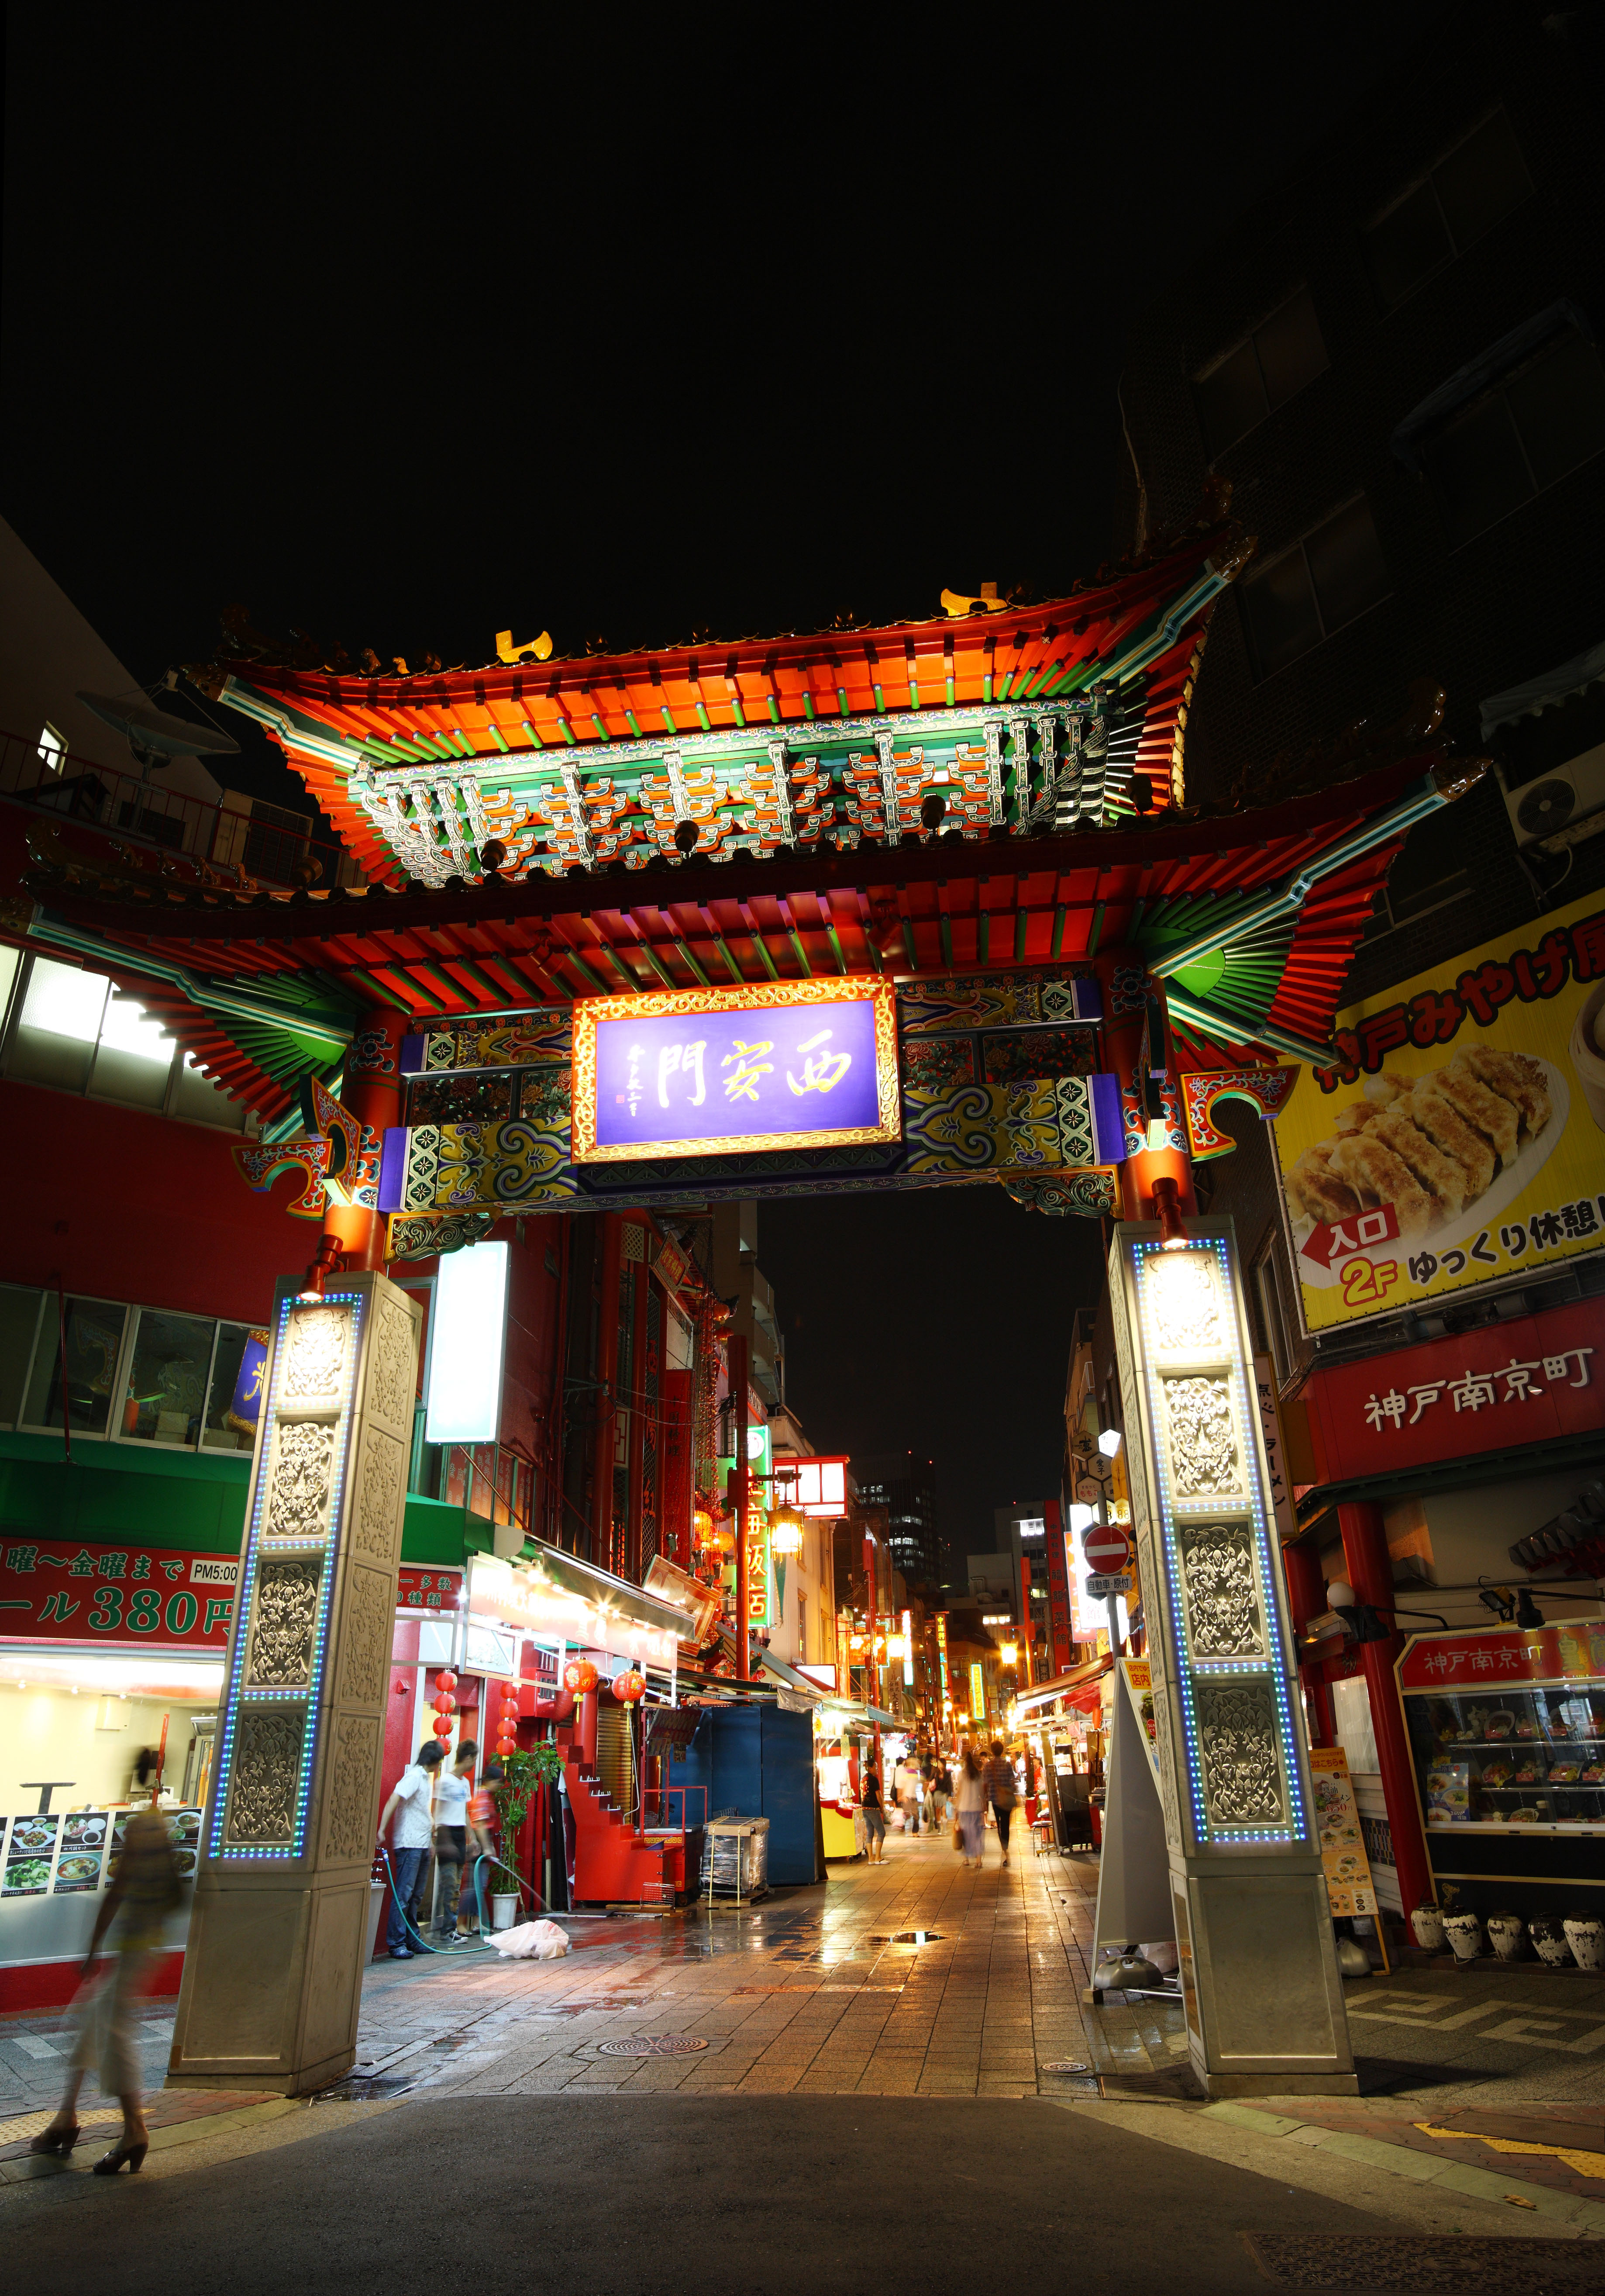 photo,material,free,landscape,picture,stock photo,Creative Commons,Kobe Nankinmachi, Chinatown, An arcade, Downtown, China